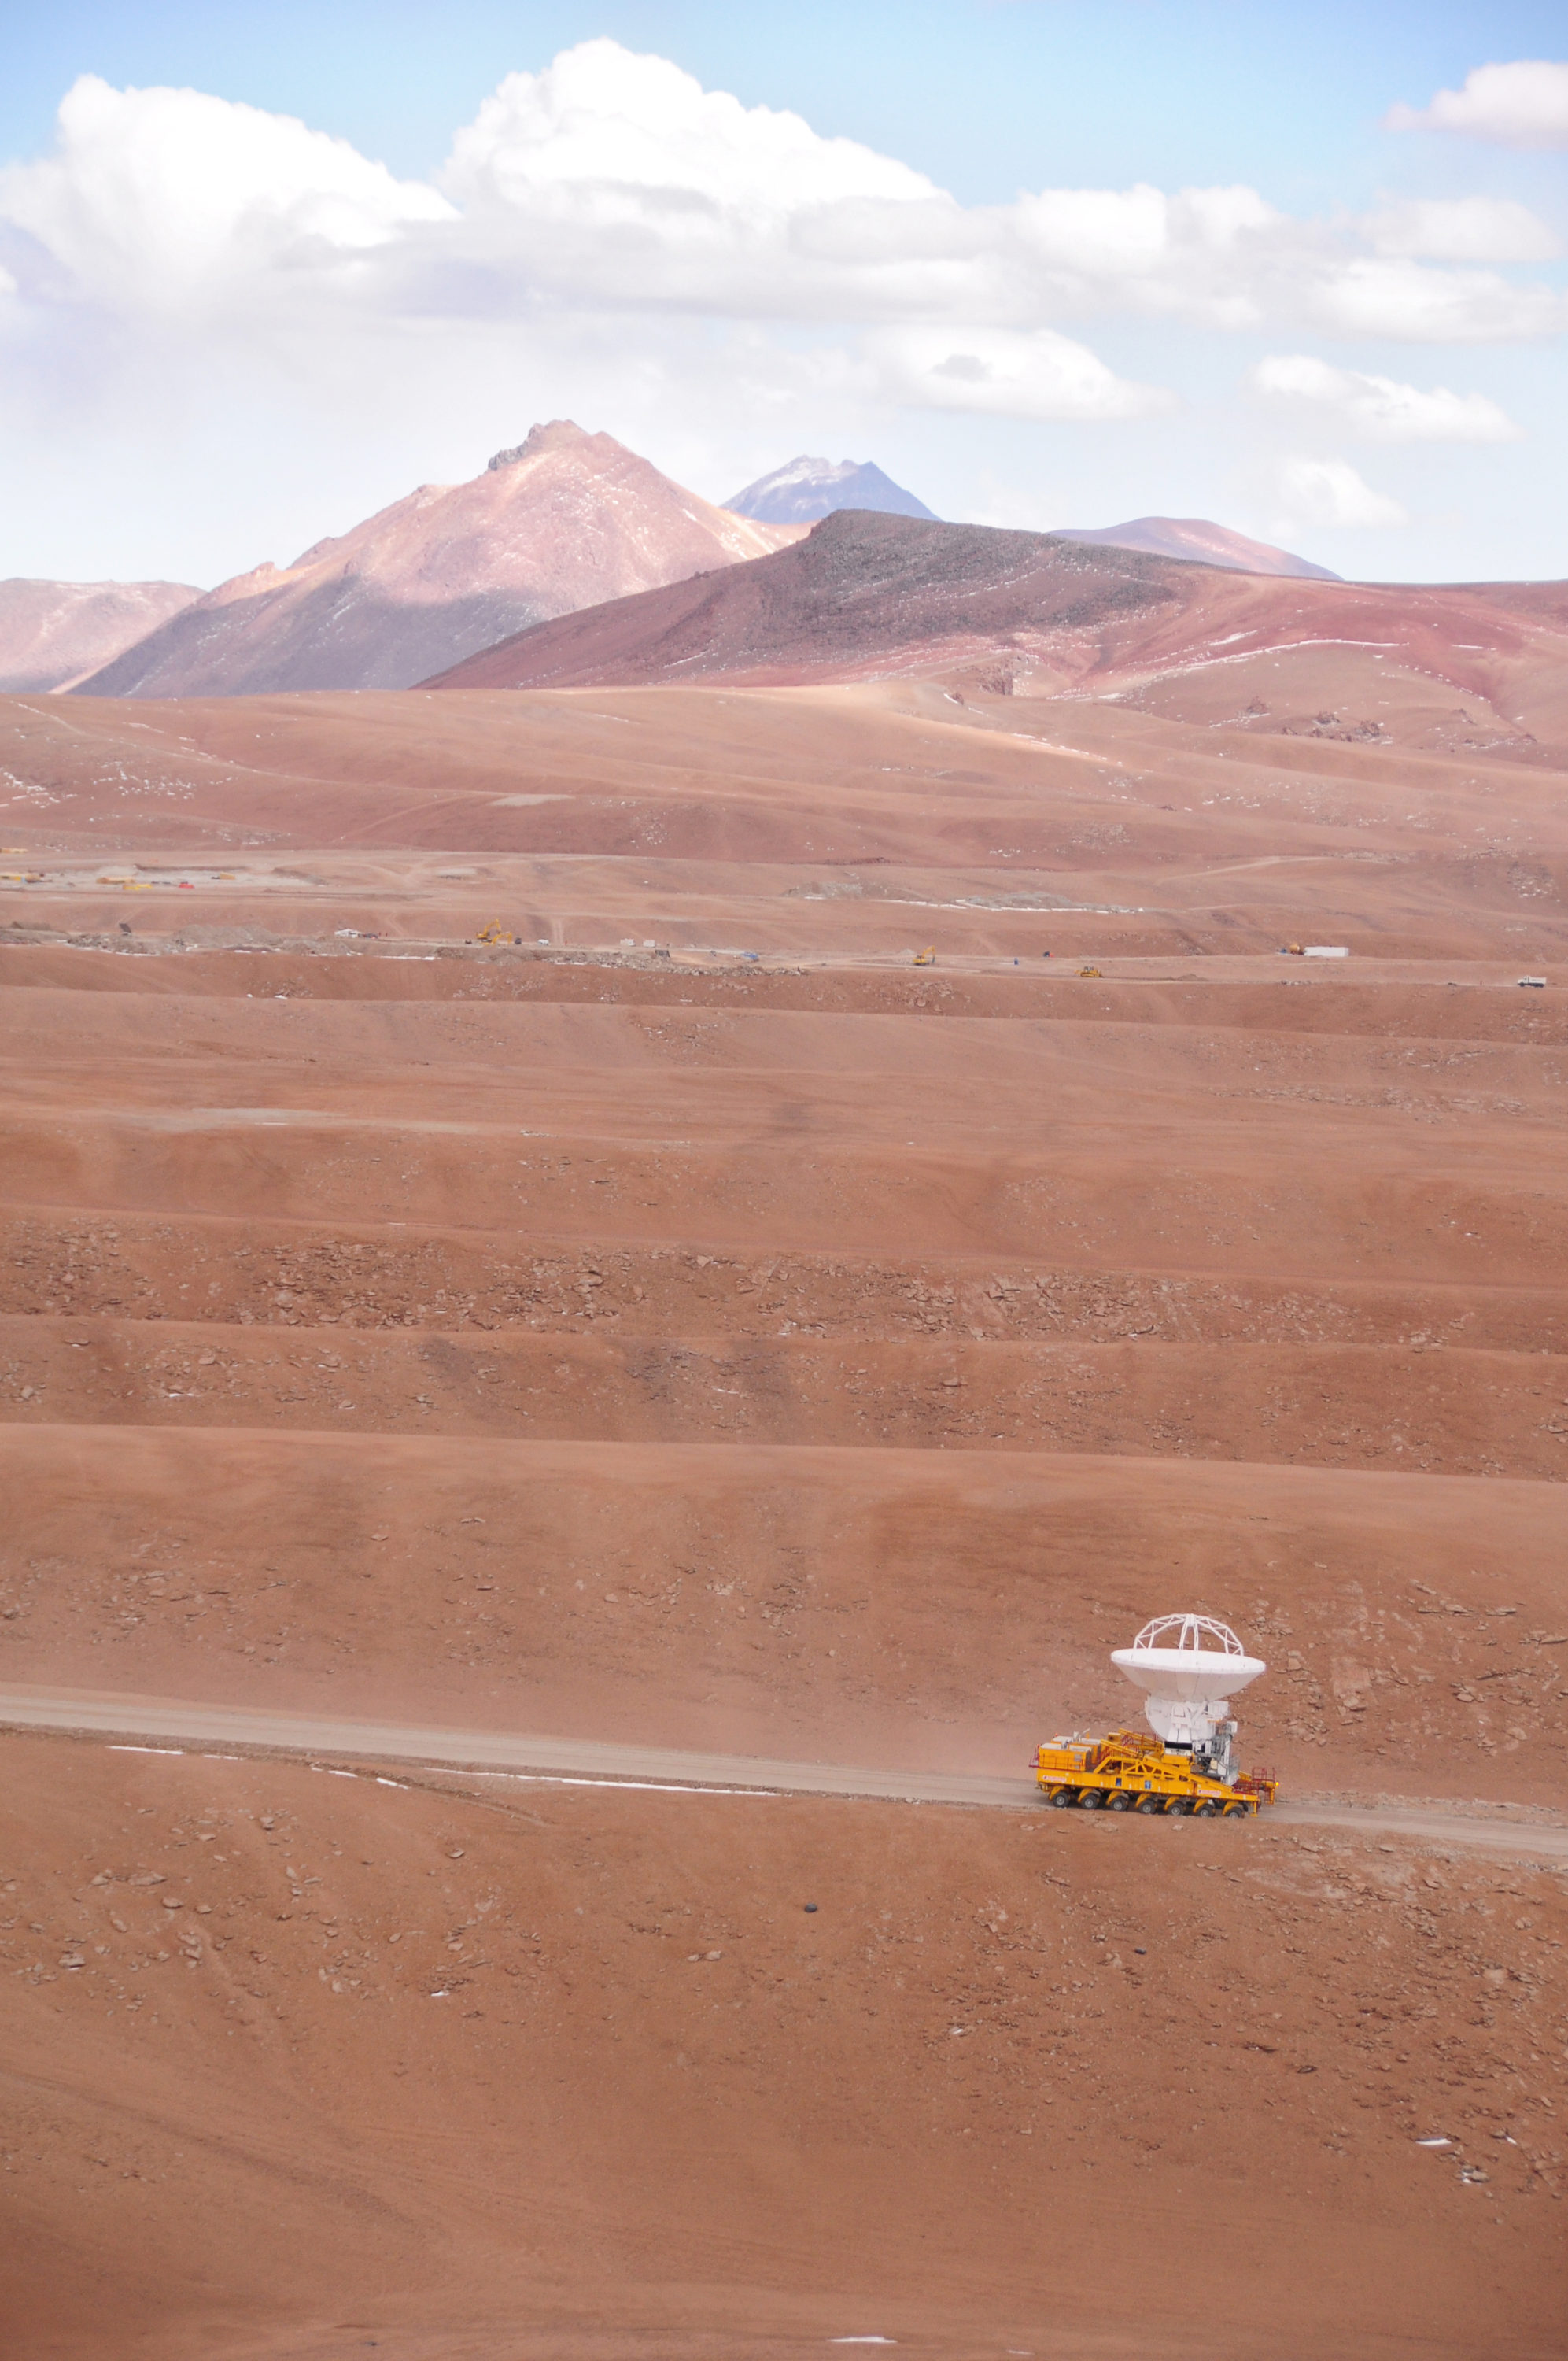 September 17, 2009: An ALMA antenna en route from the Operations Support Facility to the plateau of Chajnantor for the first time. The ALMA transporter vehicle carefully carries the state-of-the-art antenna, with a diameter of 12 meters and a weight of about 100 tons, on the 28 km journey to the Array Operations Site, which is at an altitude of 5000 m. The antenna is designed to withstand the harsh conditions at the high site, where the extremely dry and rarefied air is ideal for ALMA’s observations of the universe at millimeter- and submillimeter-wavelengths. © Ralph Bennett - ALMA (ESO/NAOJ/NRAO)